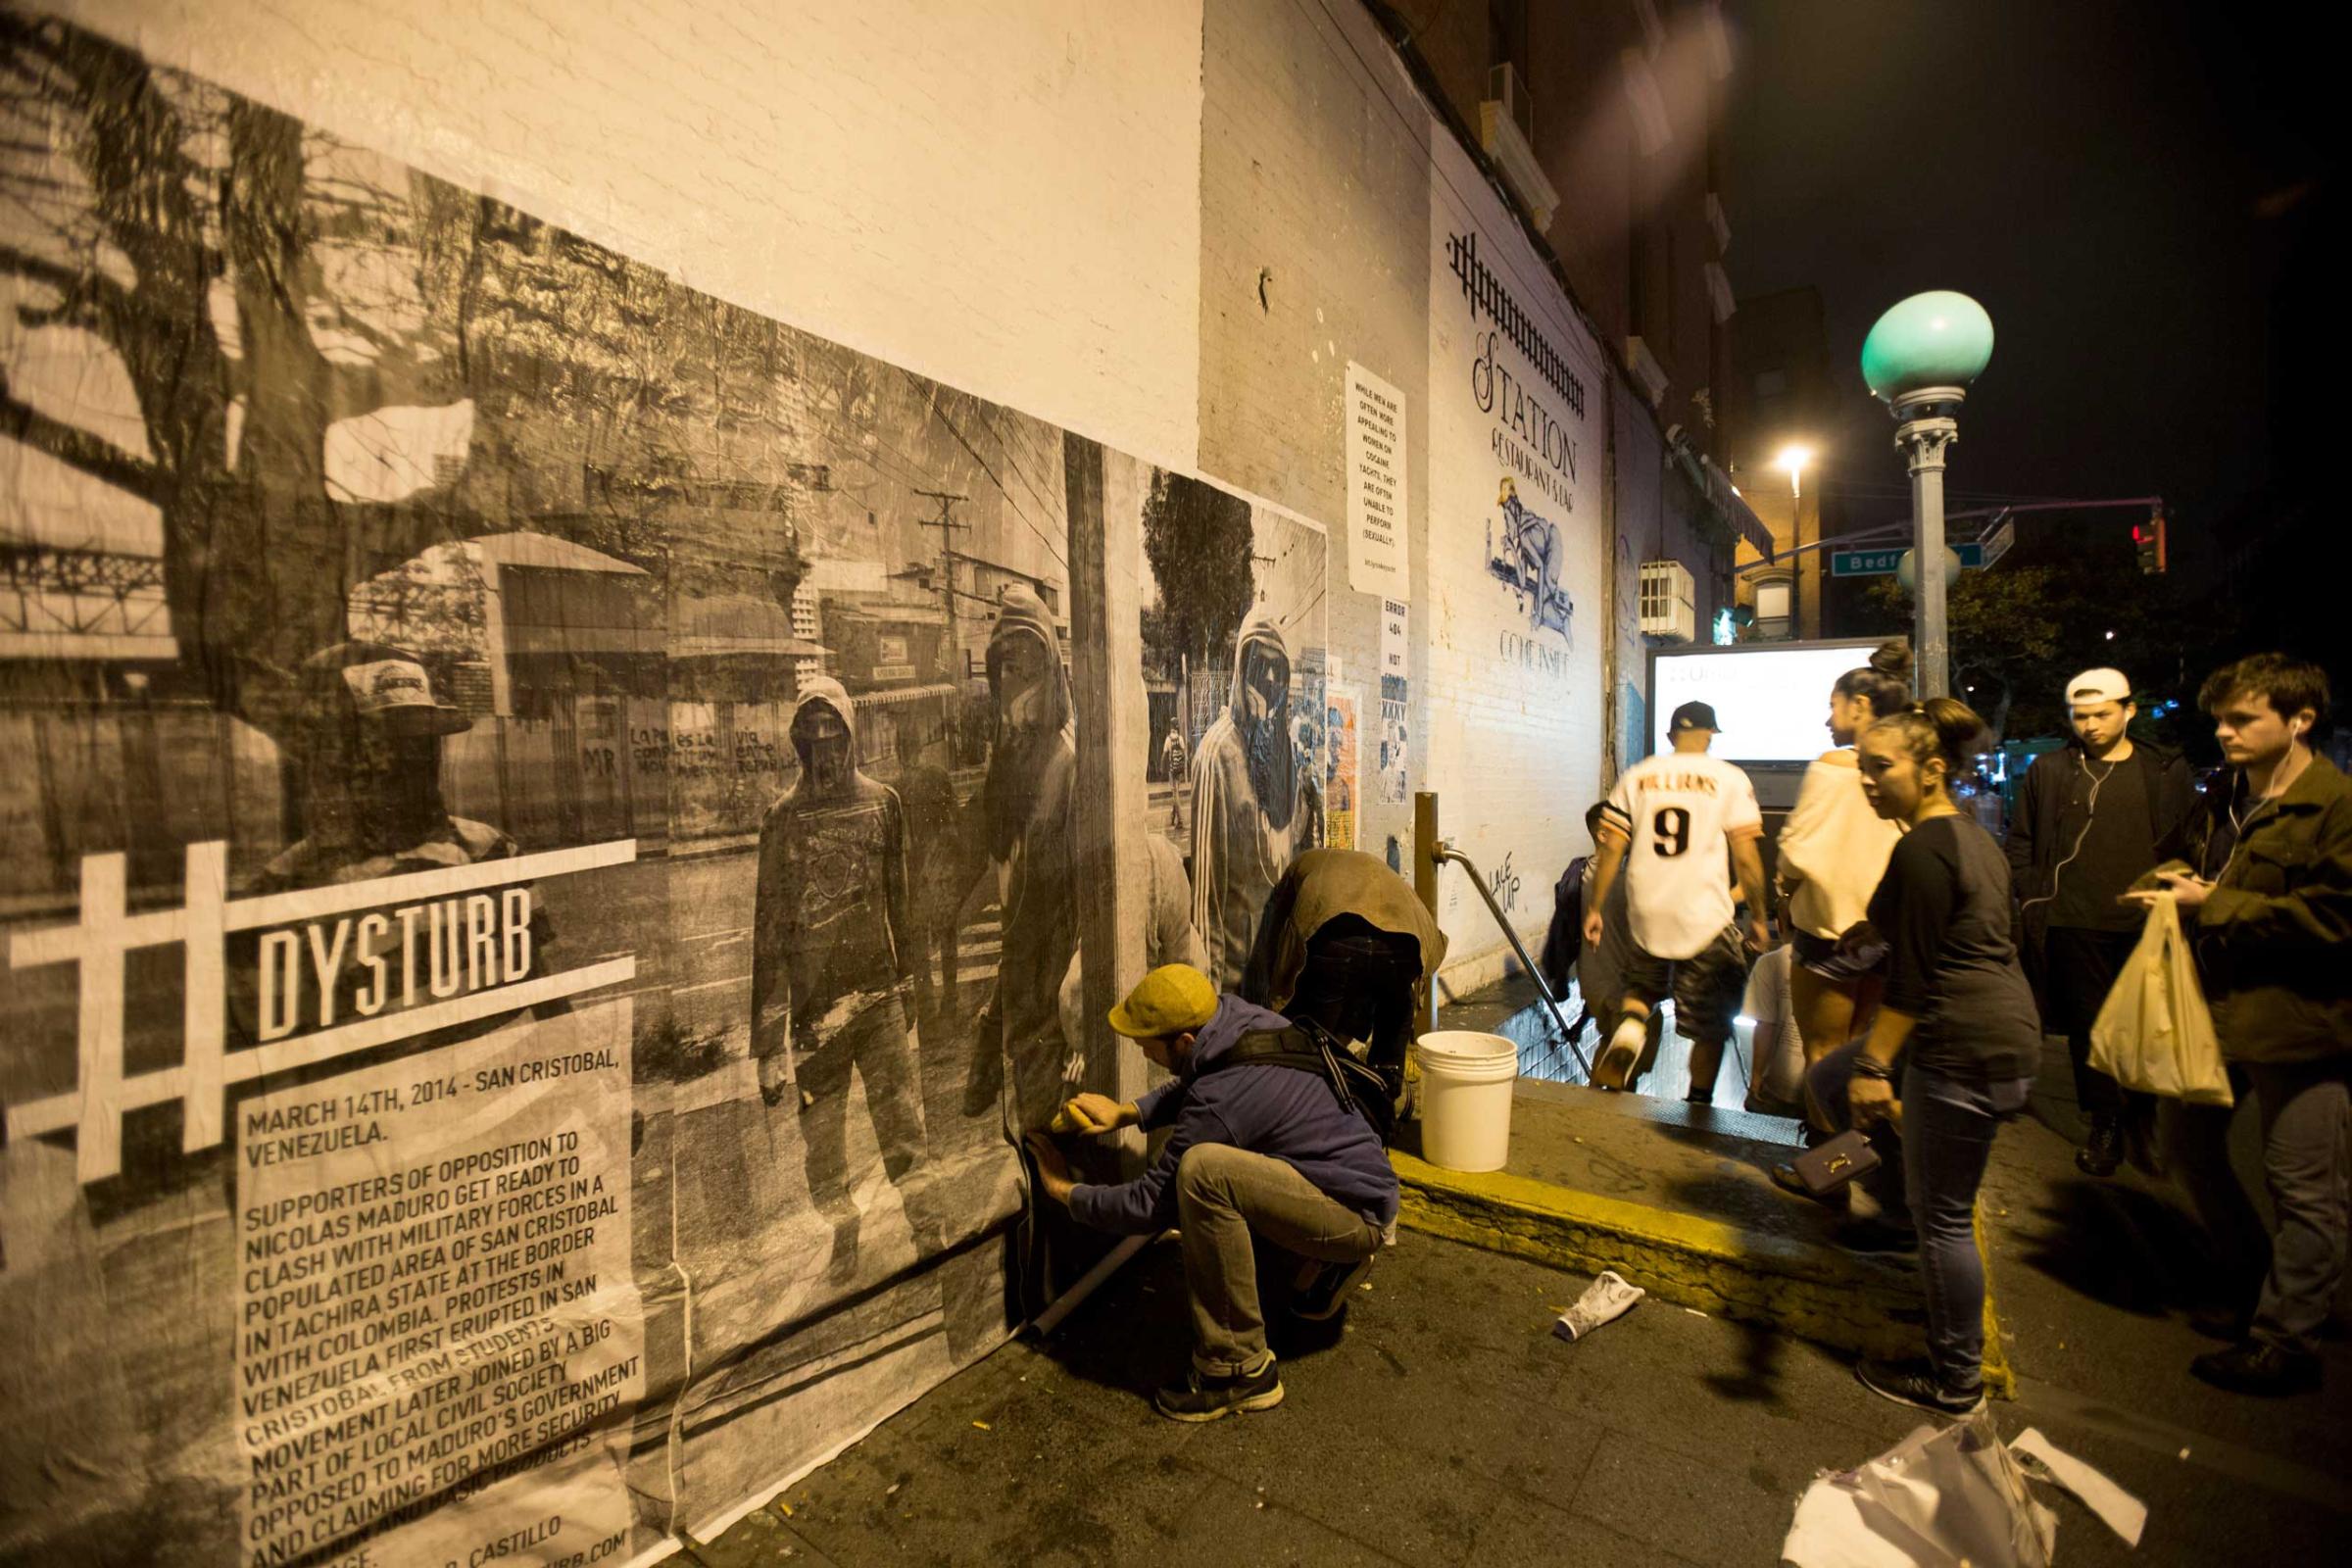 Onlookers, as the Dysturb team paste a photograph in Brooklyn, New York (on the corner of N 7th Street and Bedford Avenue). October 16th 2014.